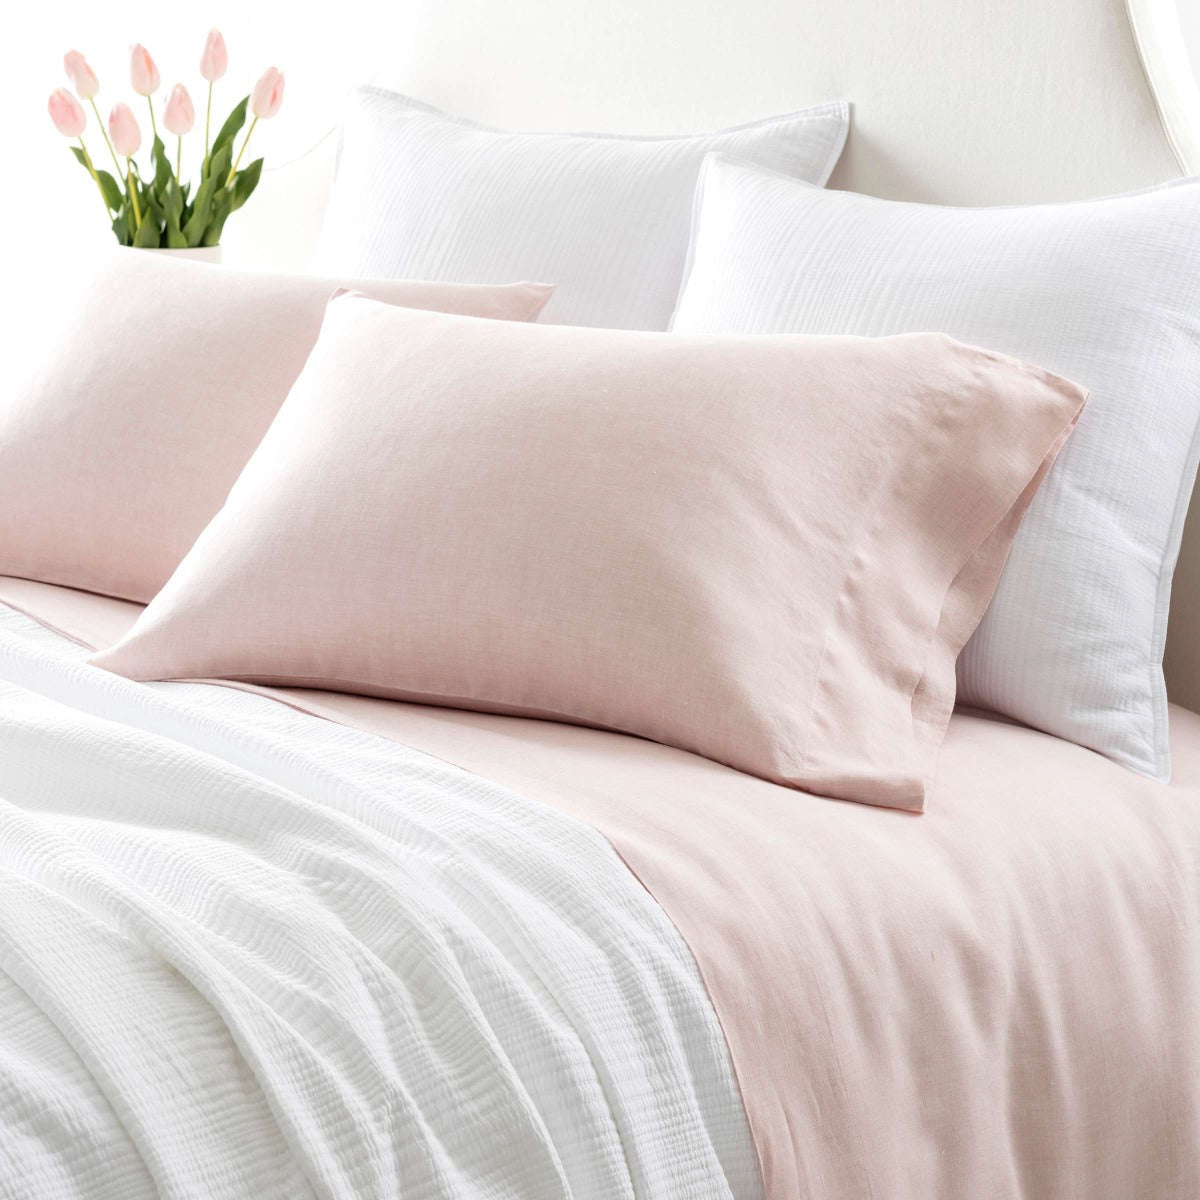 Lush Linen Slipper Pink Sheet Set styled with white bedding. Styled view. 